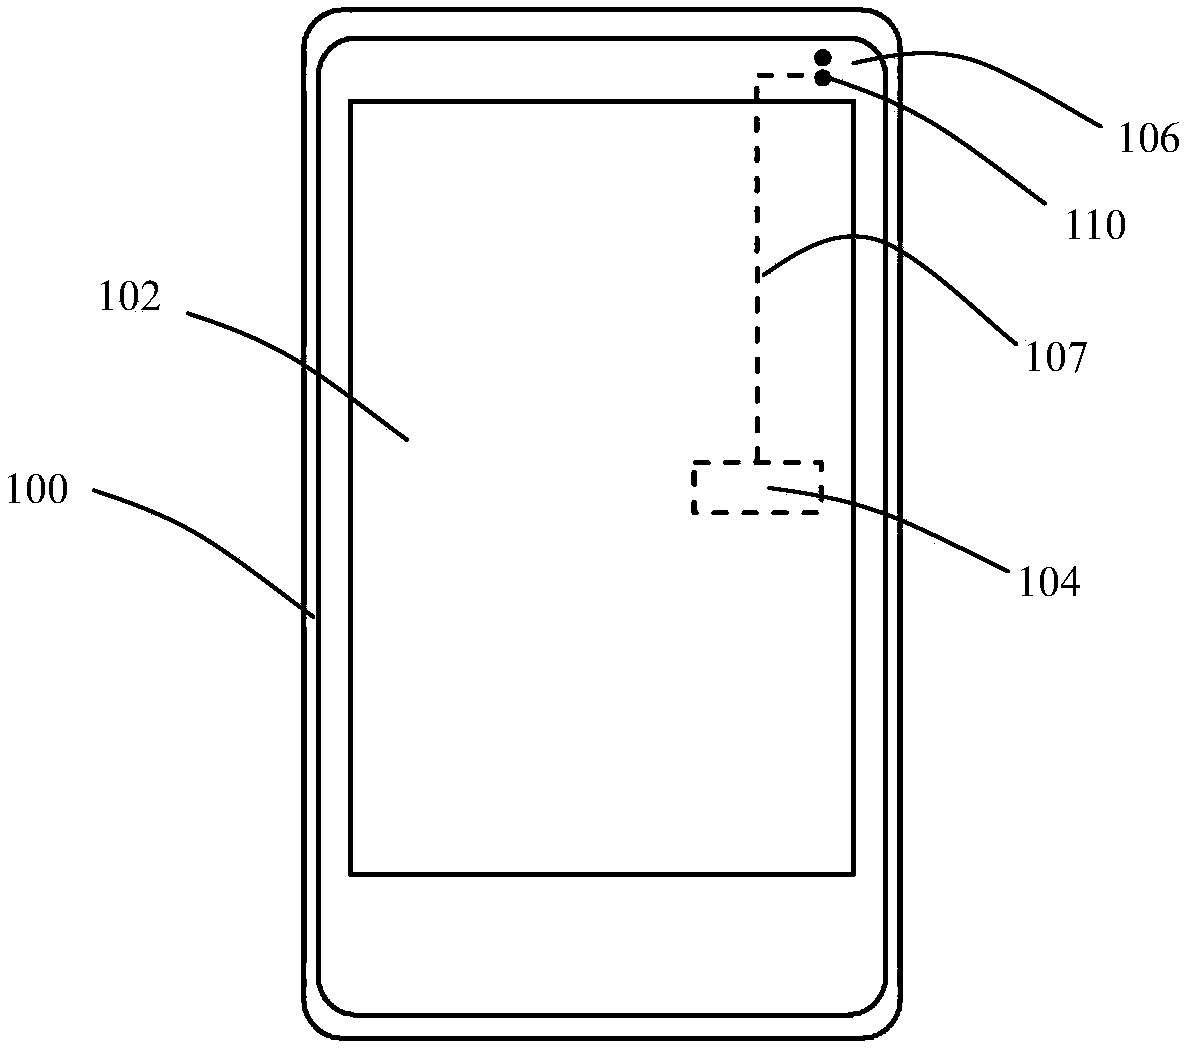 Electronic device with conversation function and shell body